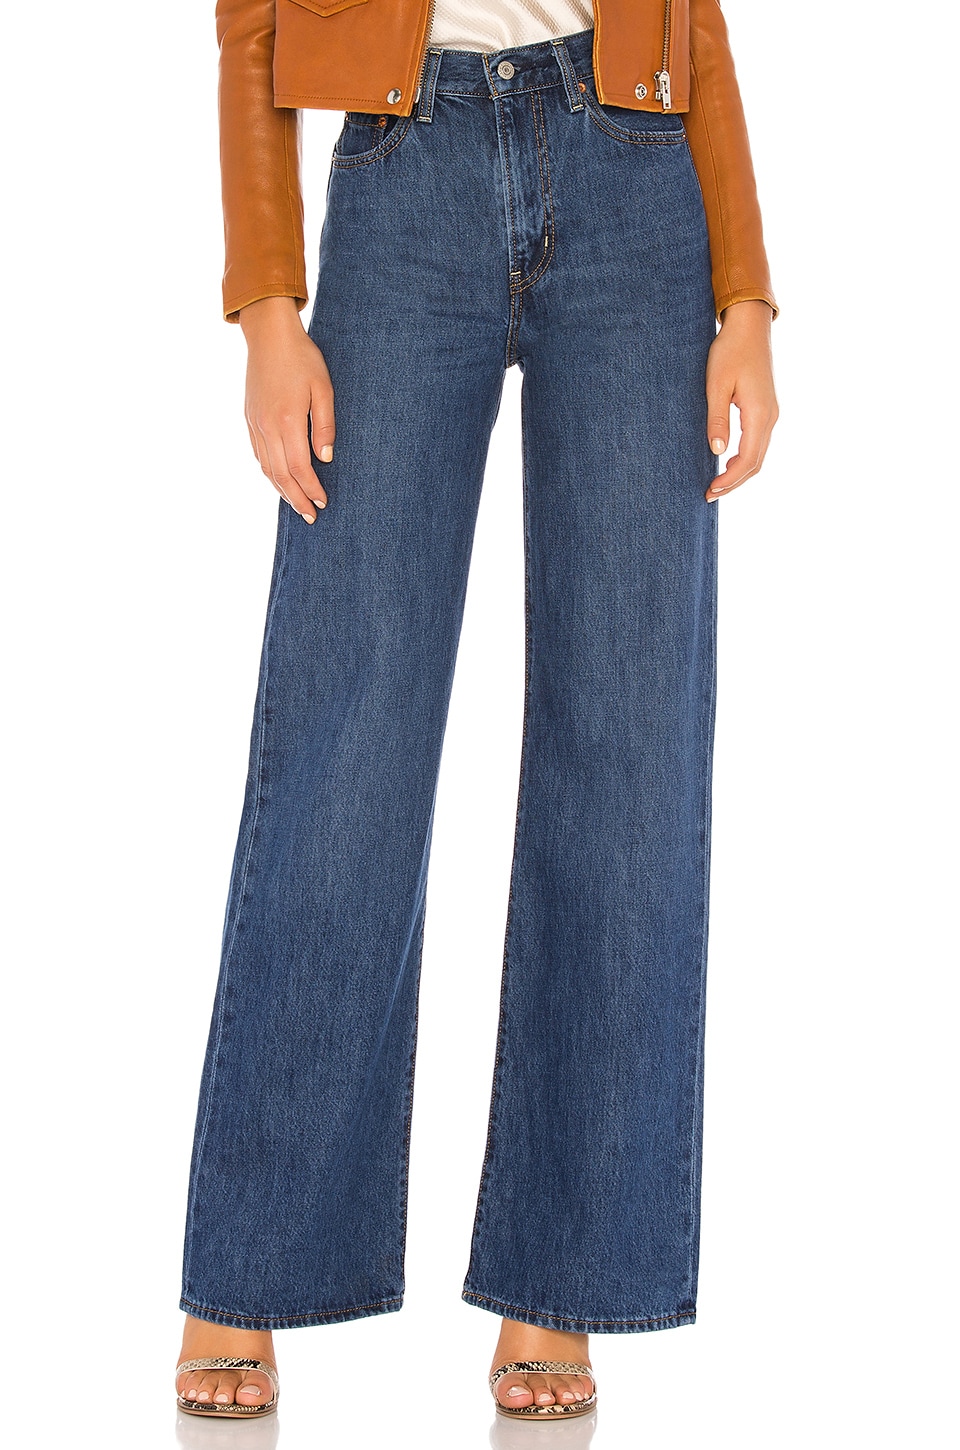 LEVI'S Ribcage Wide Leg Jean in High 